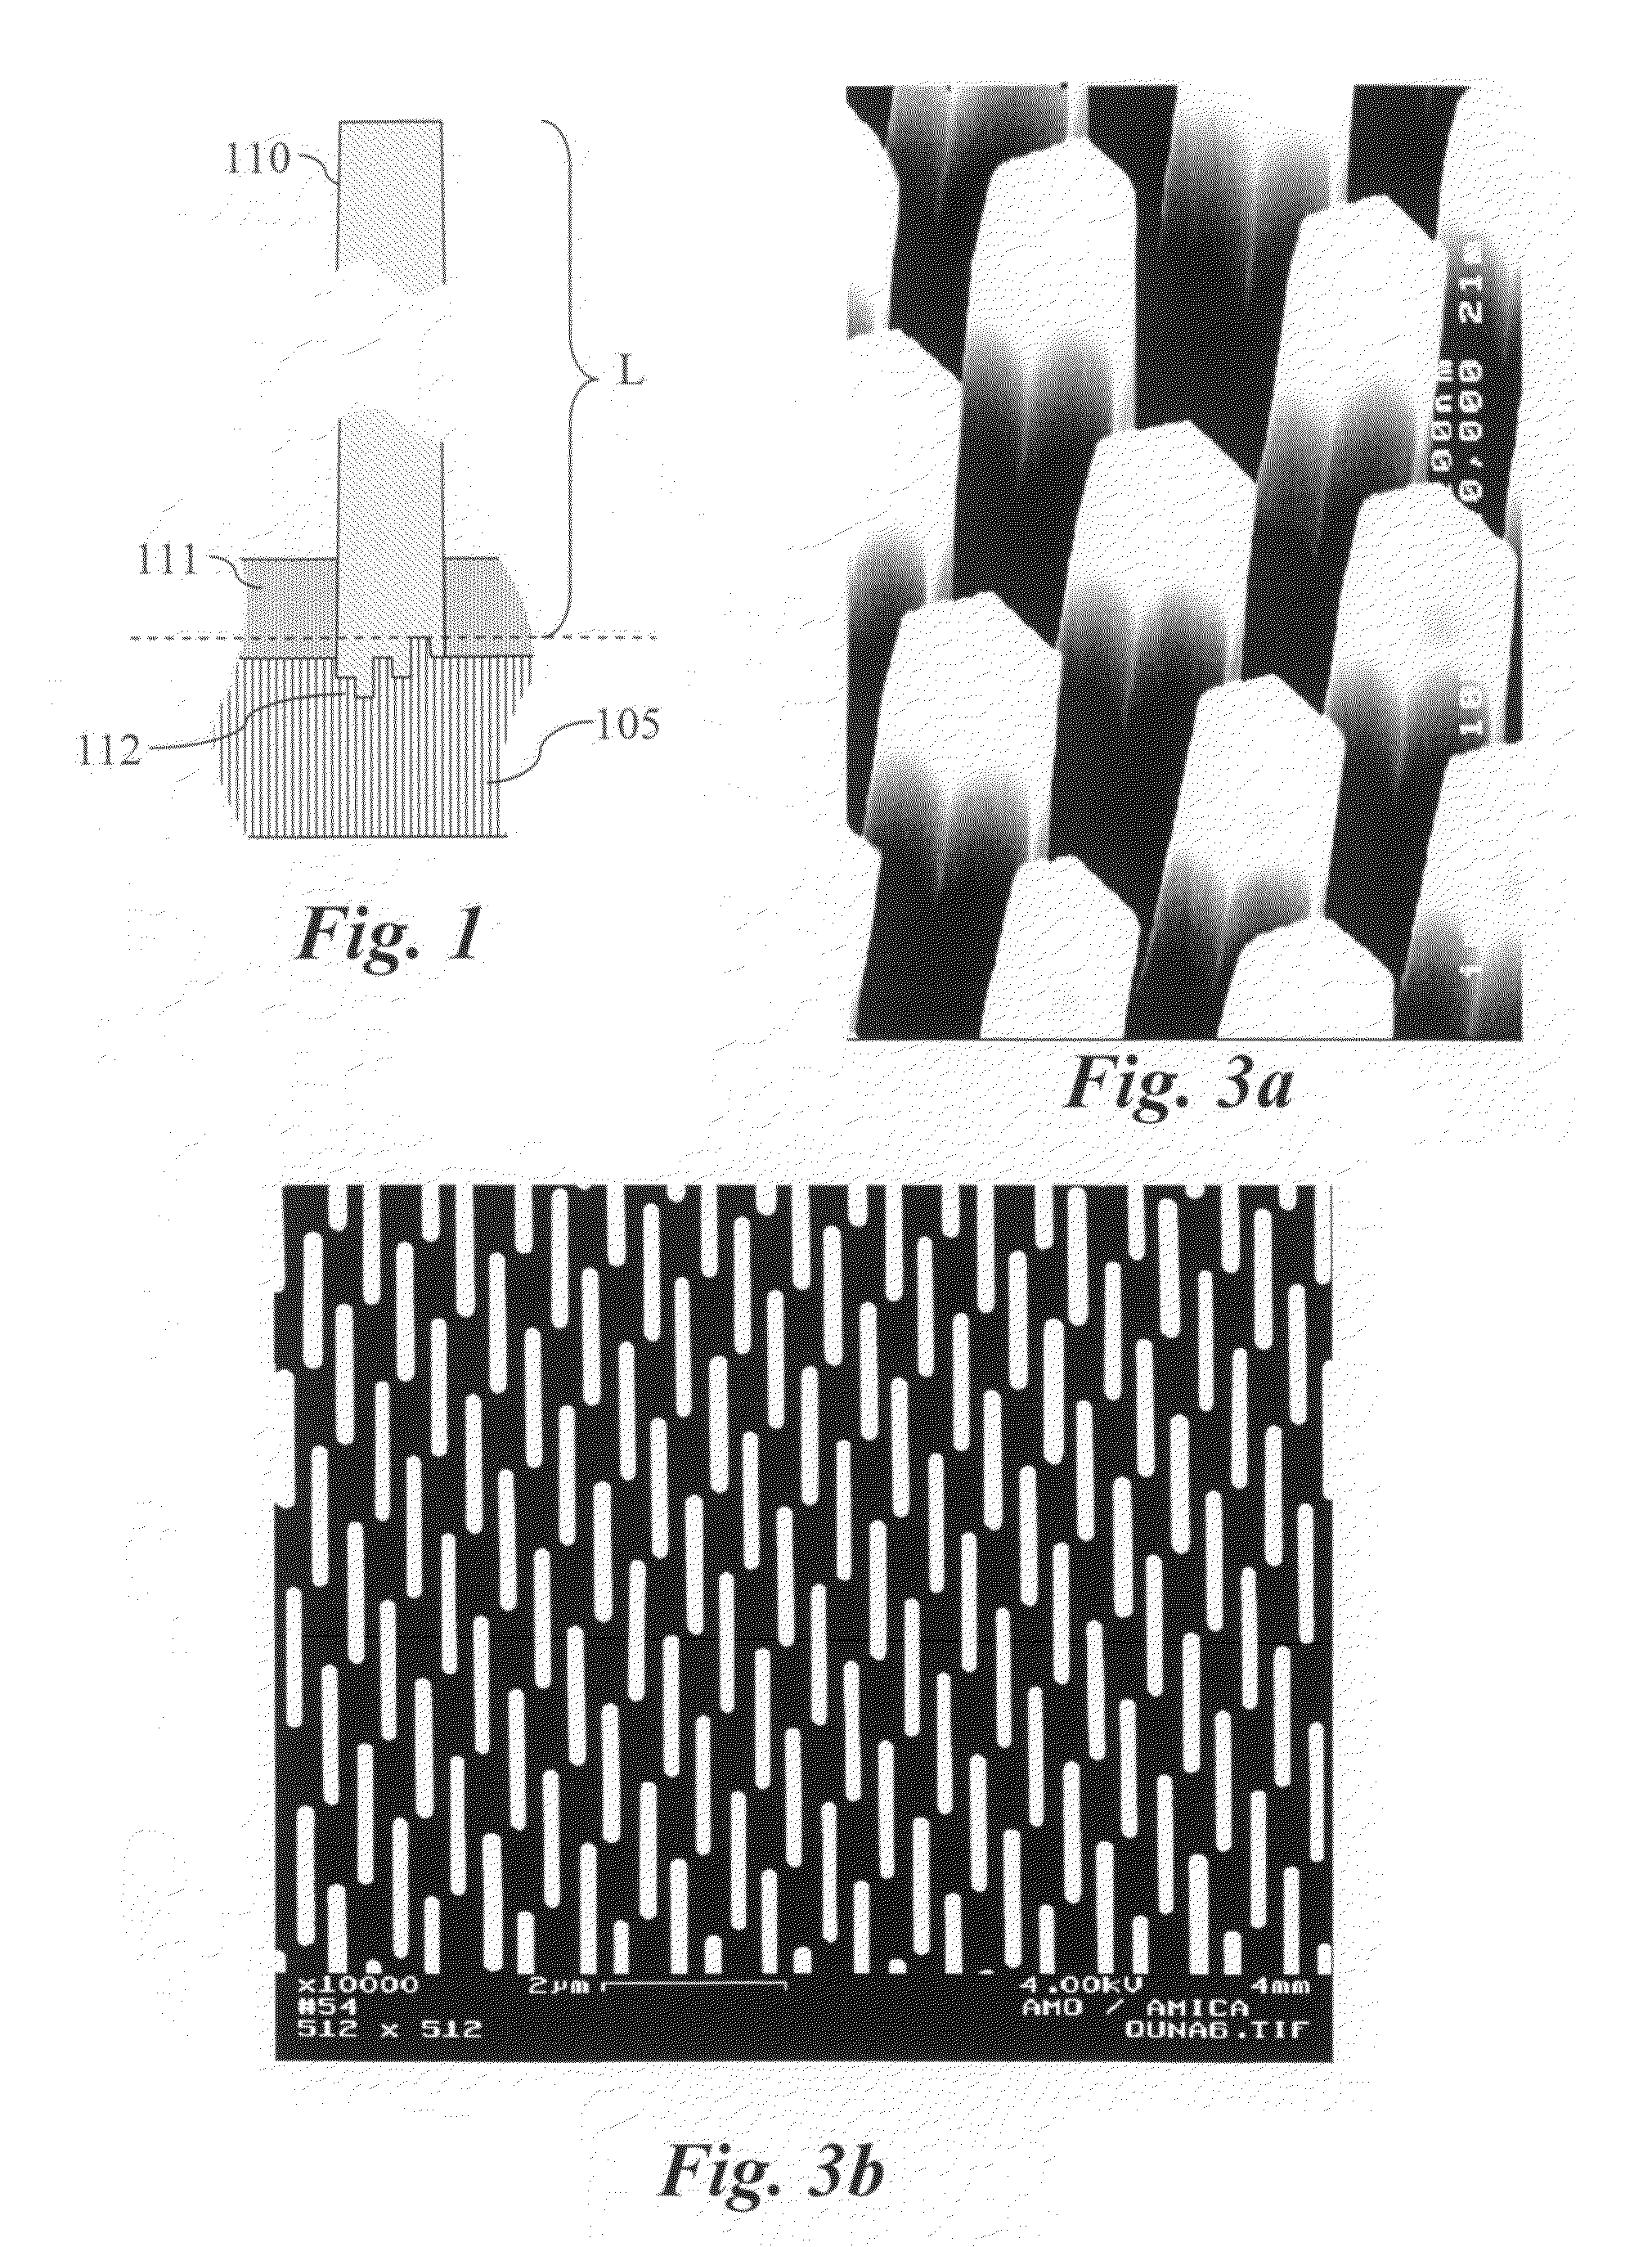 Nitride nanowires and method of producing such